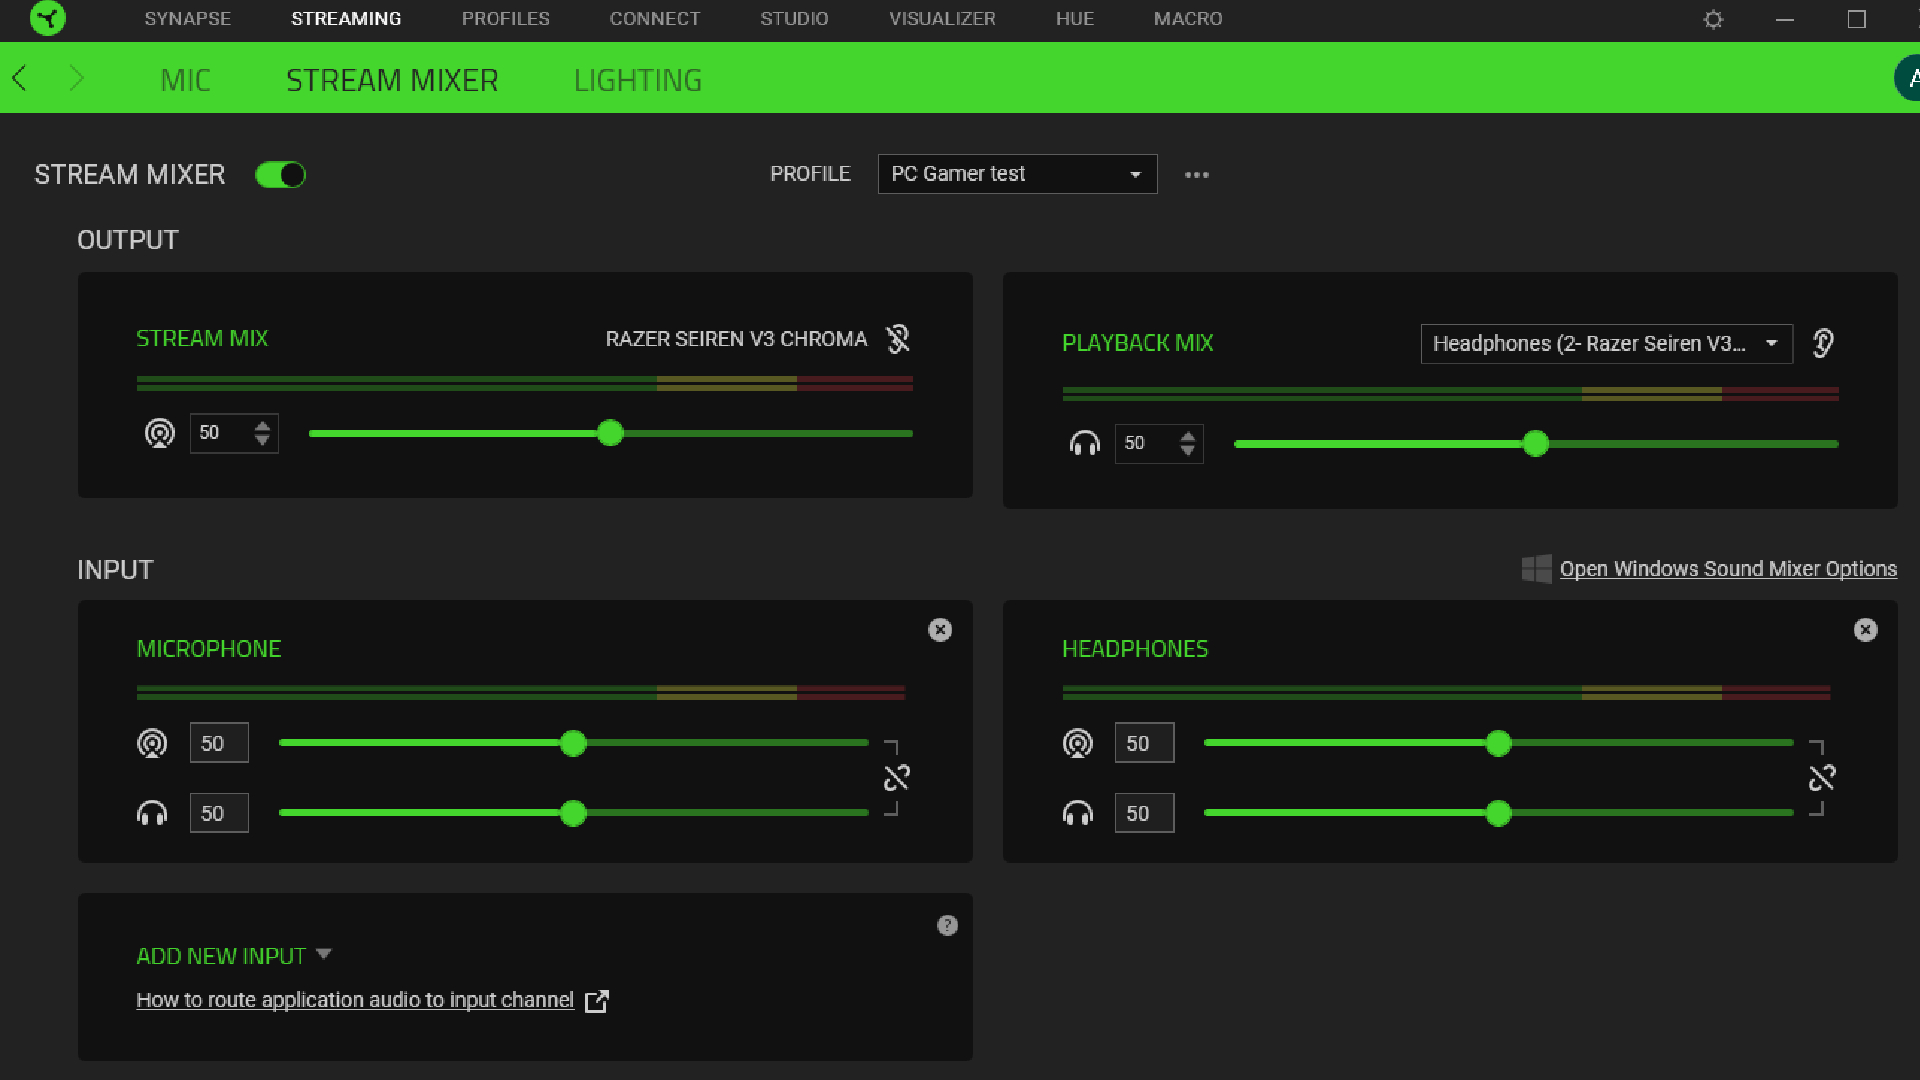 A screenshot of the Stream Mixer settings in the Razer Synapse software